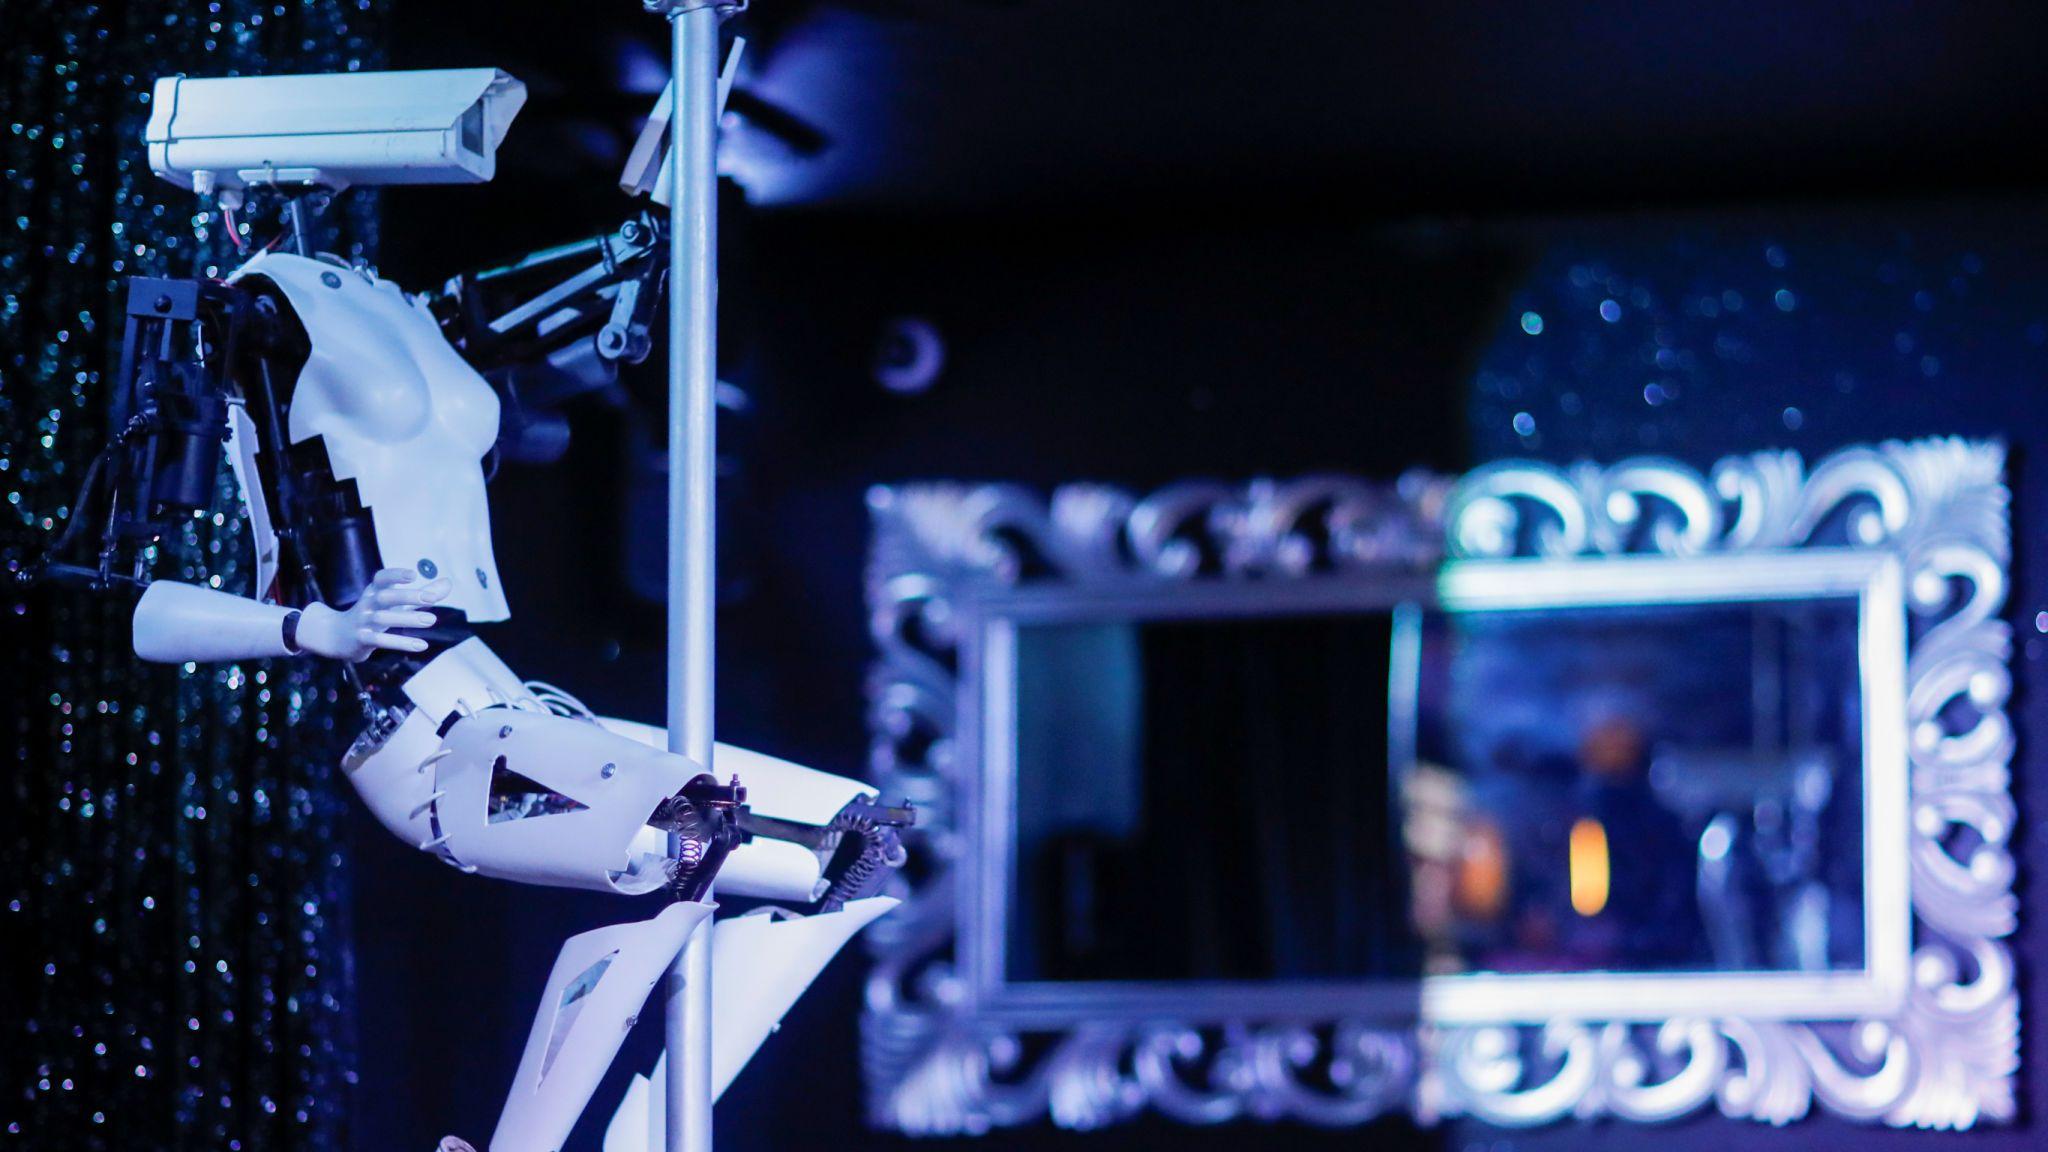 Robot Pole Dancers to Debut at French Club - Robot News